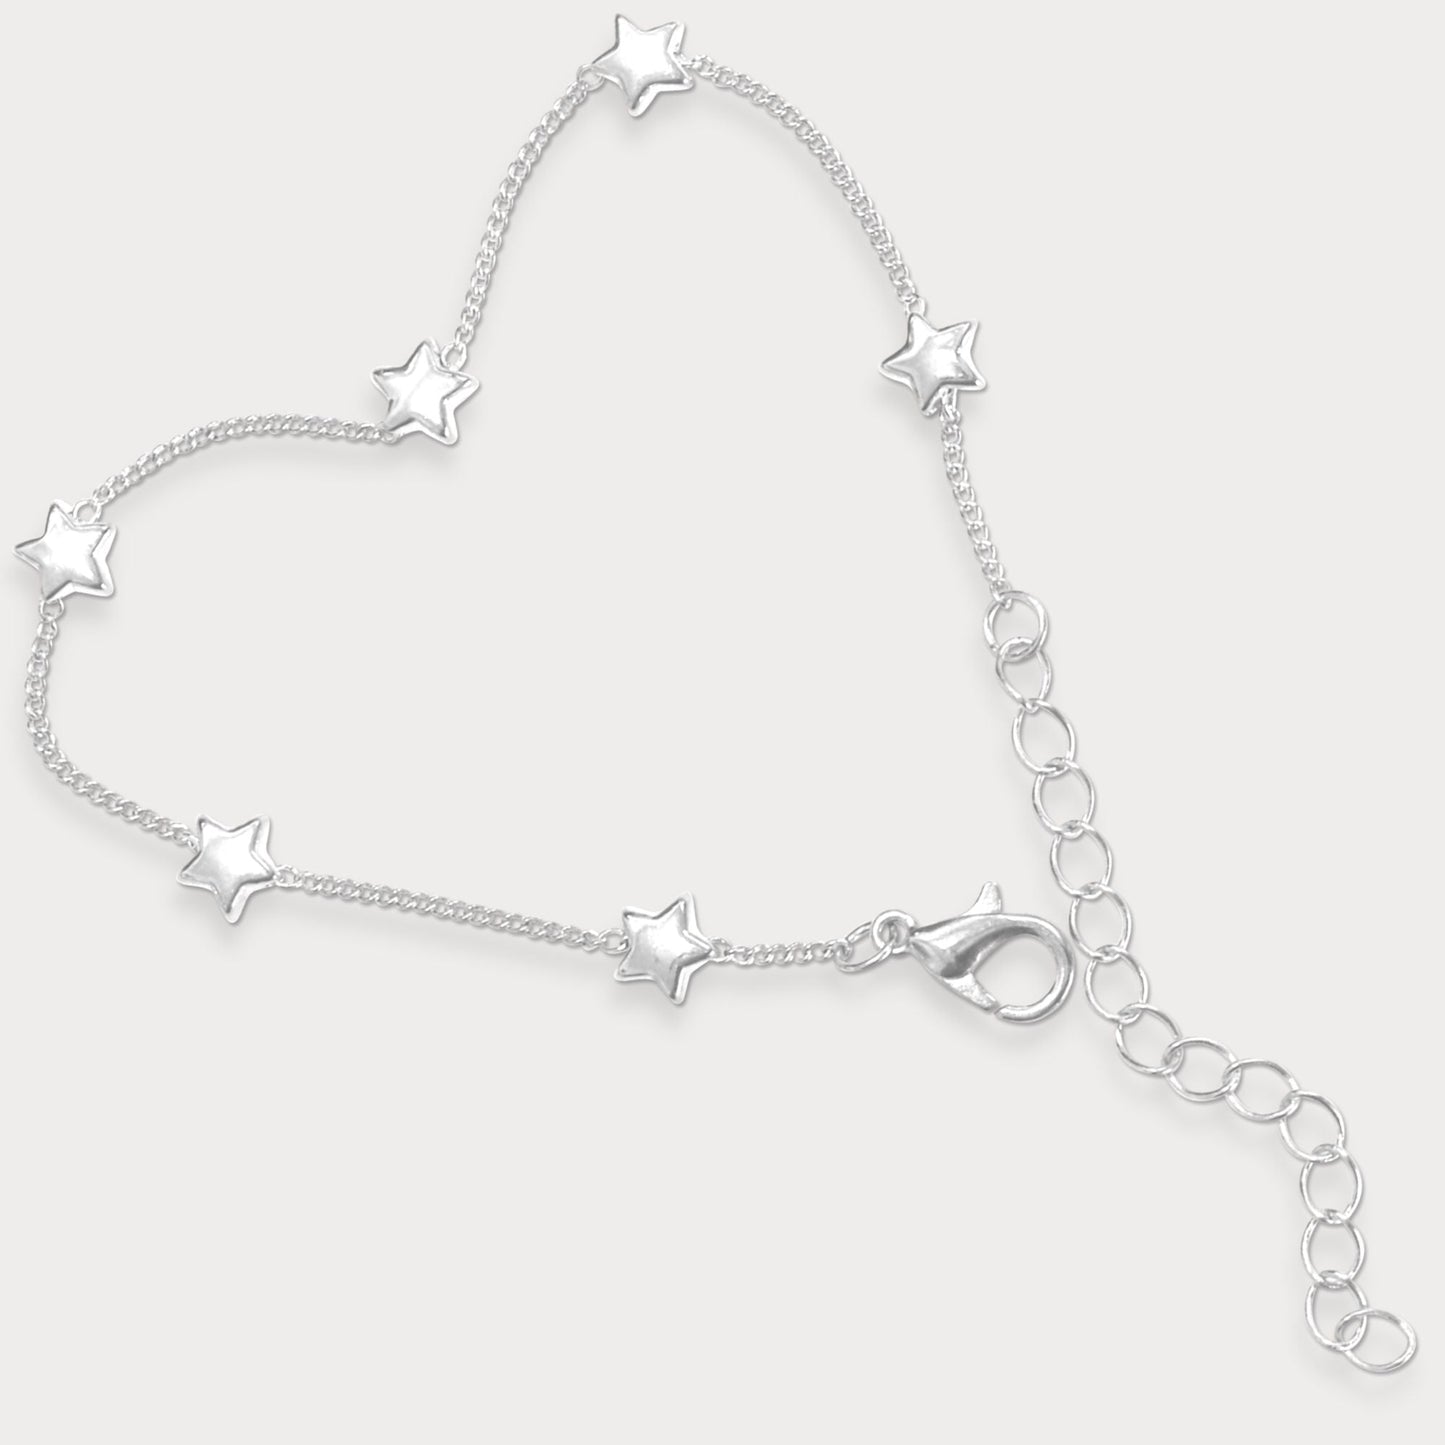 Good Friend Bracelet - 925 Silver Star Bracelet with Card and Gift Wrap